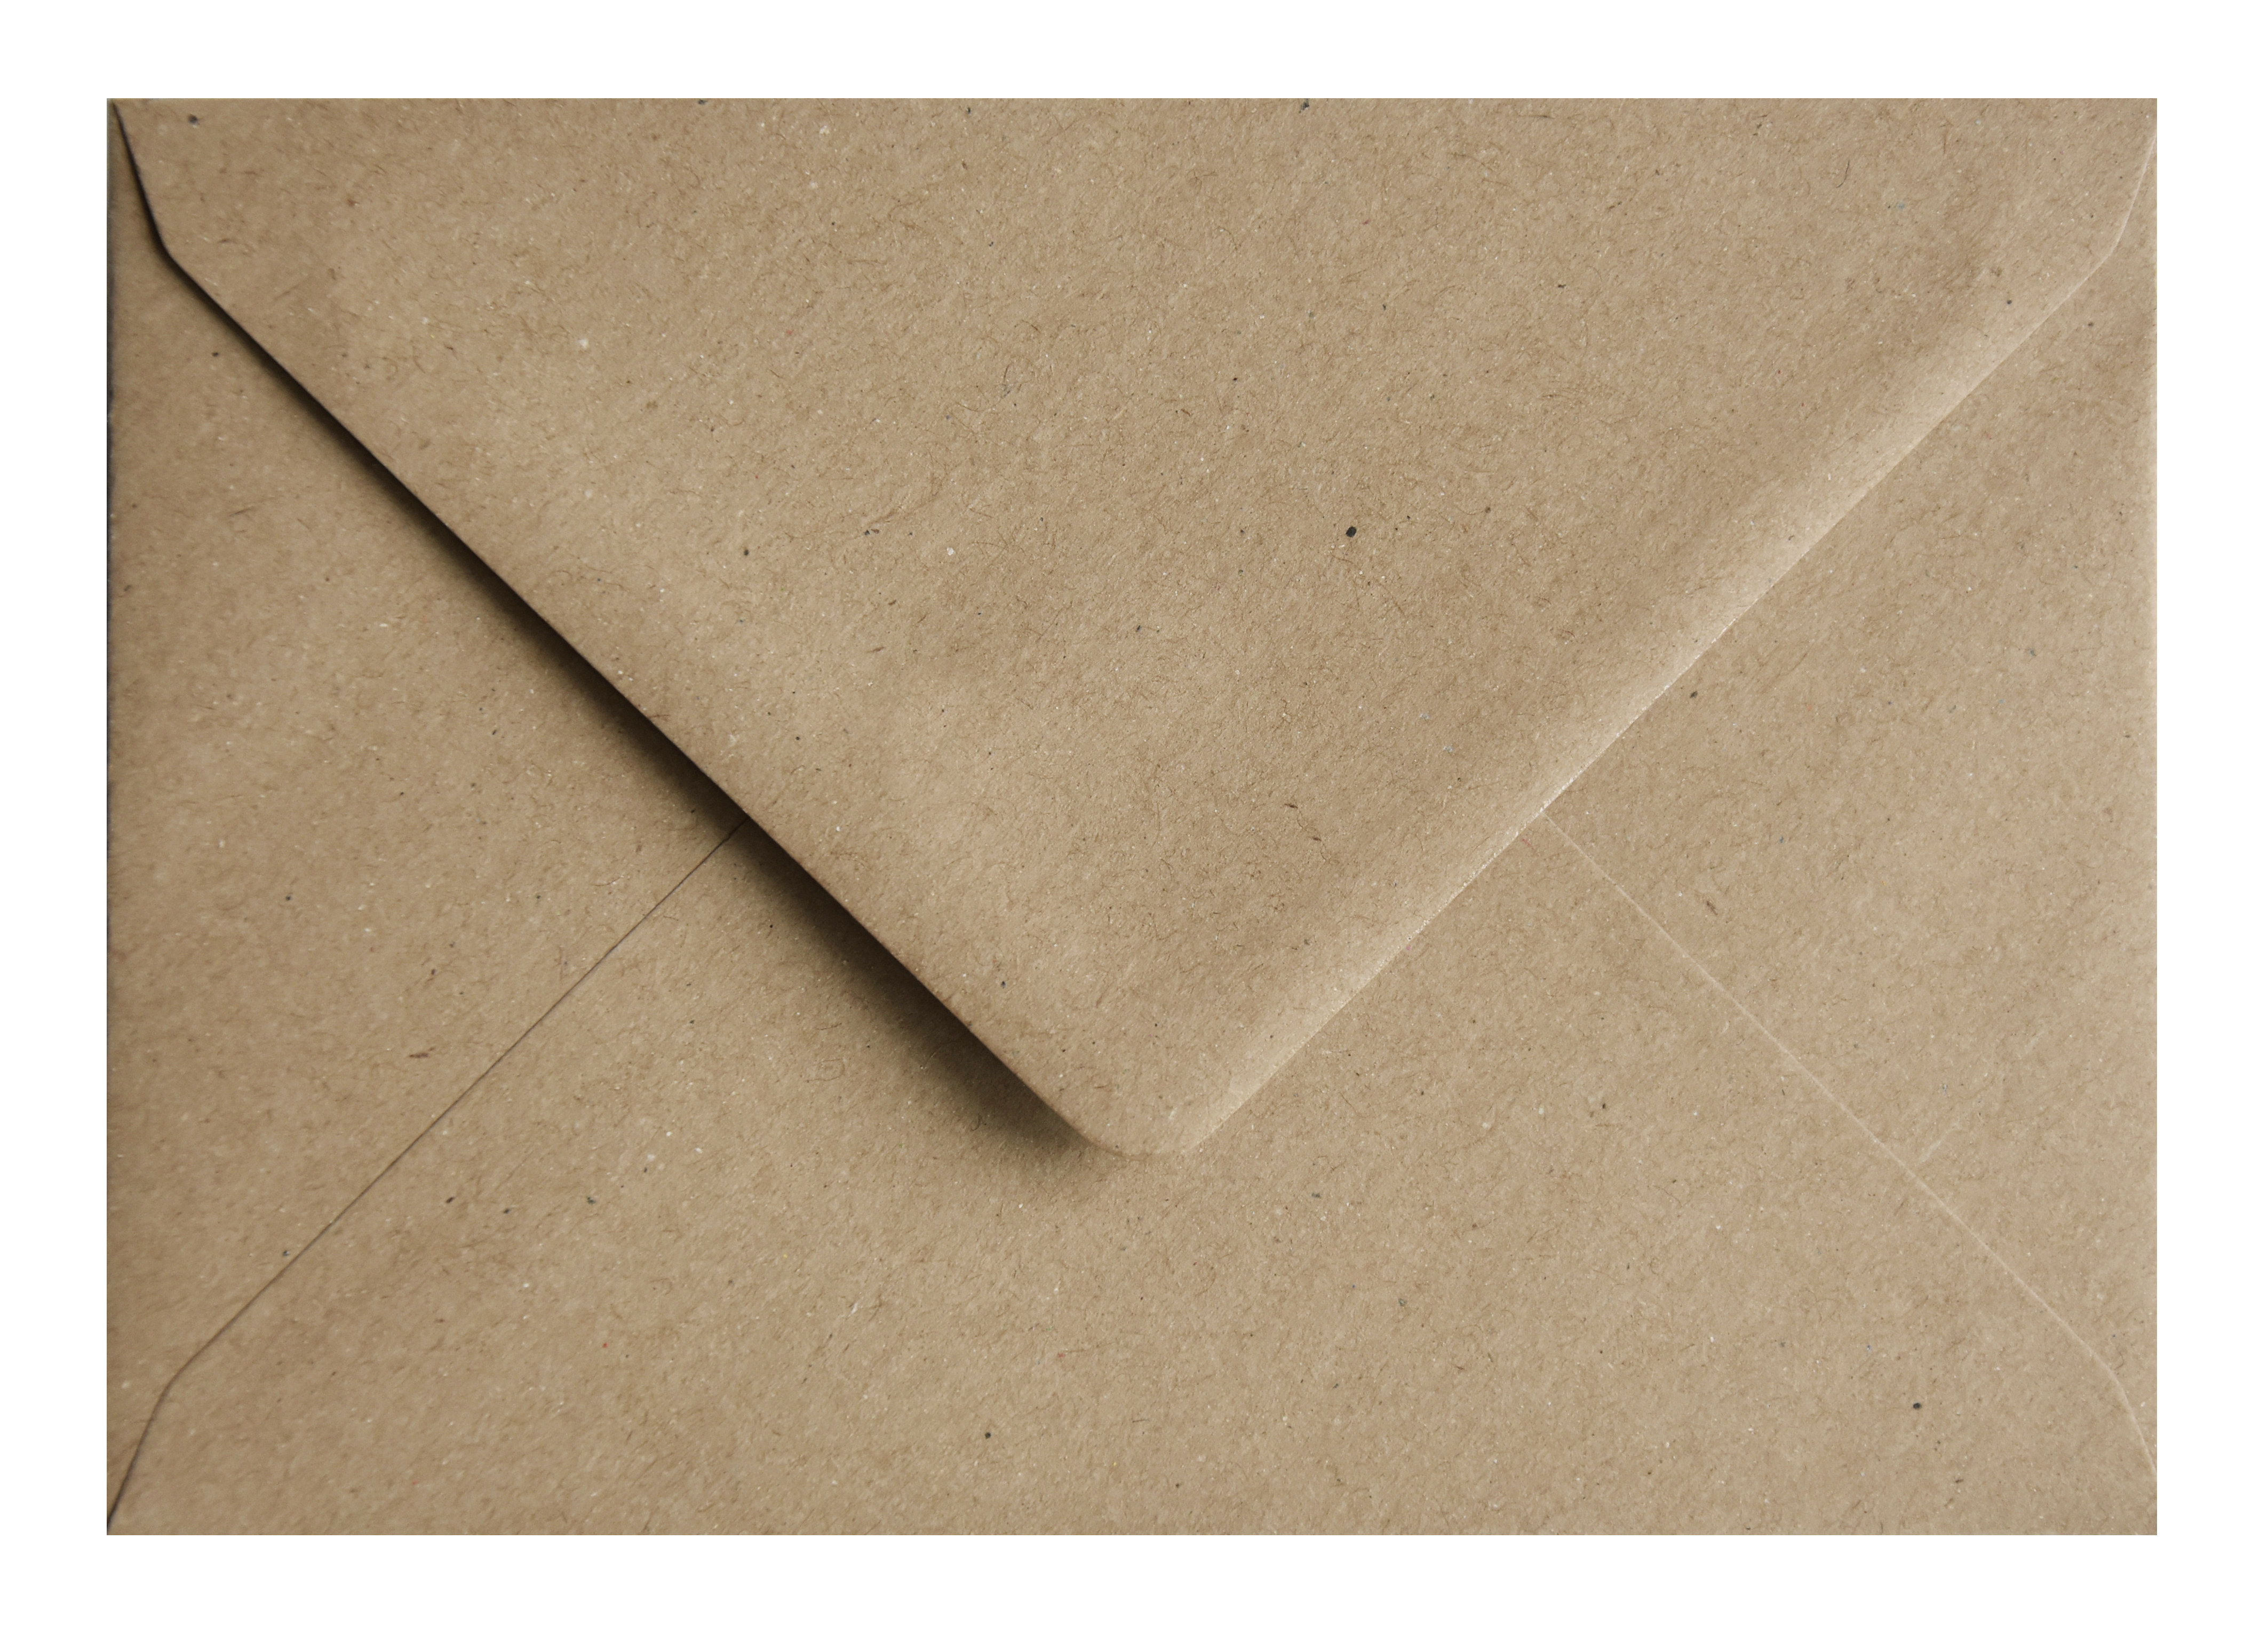 Original Crown Mill - 100% Recycled Envelopes 